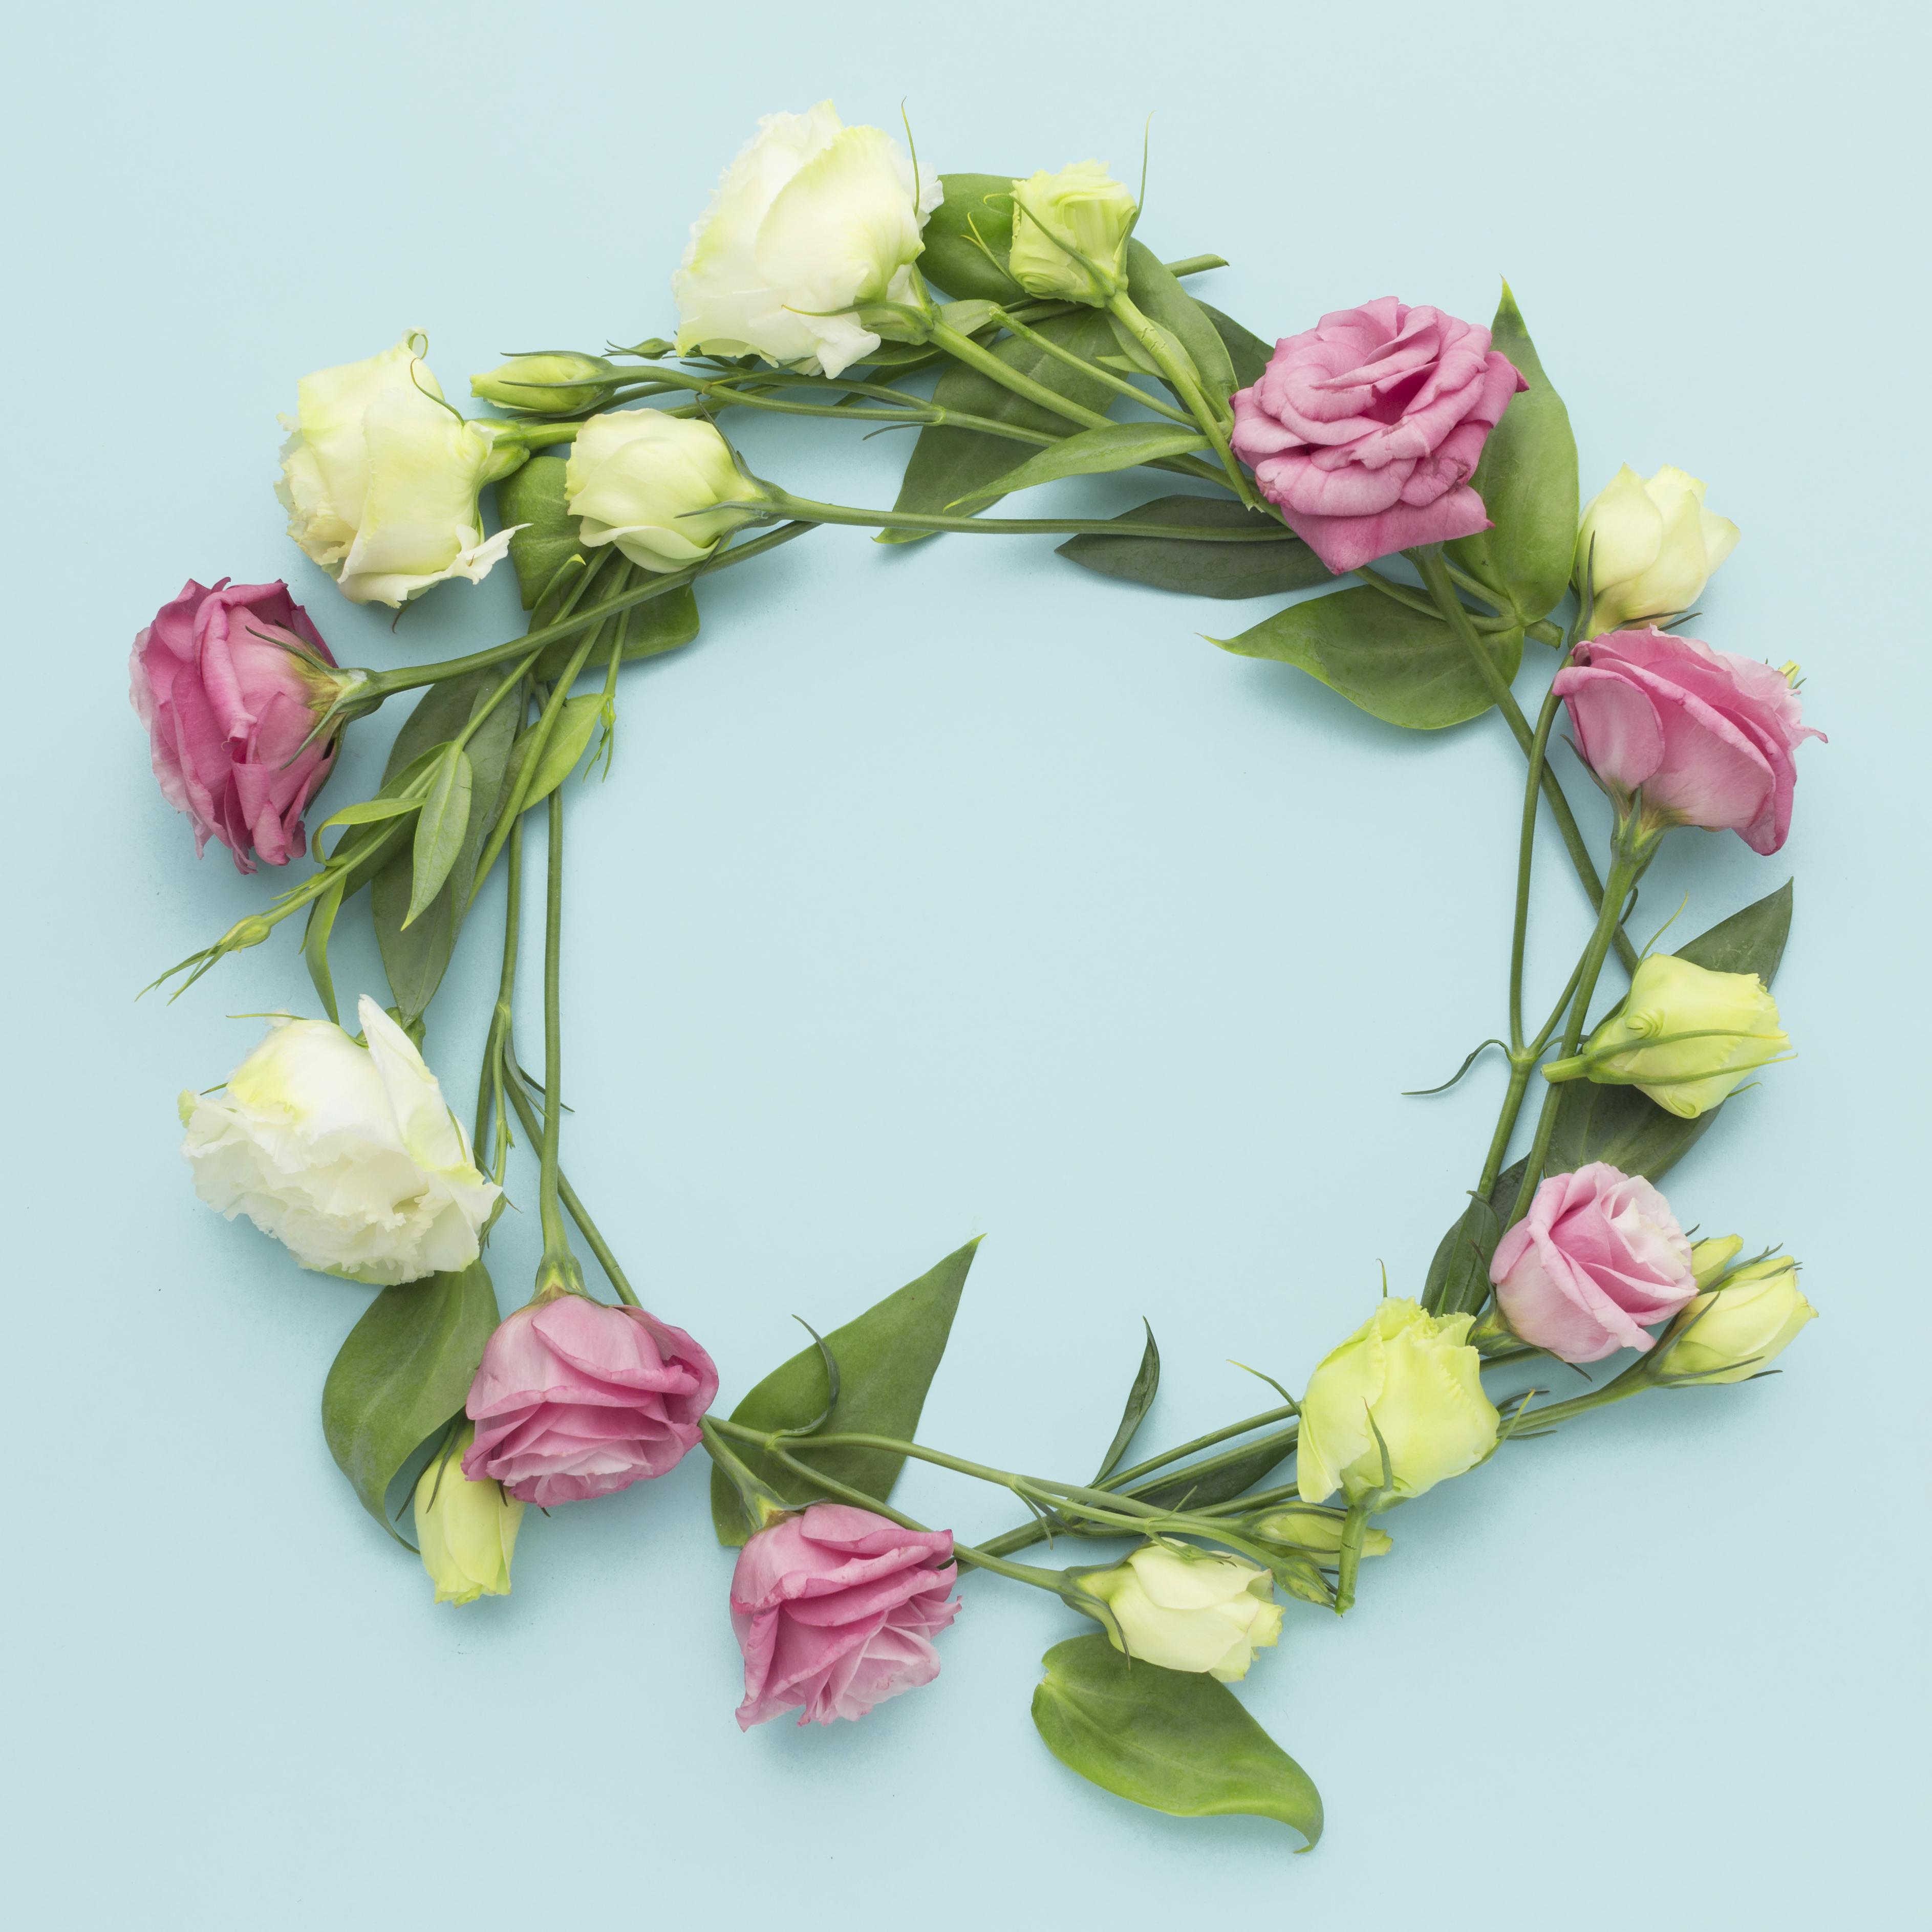 Wreath made of Flowers on Blue Background